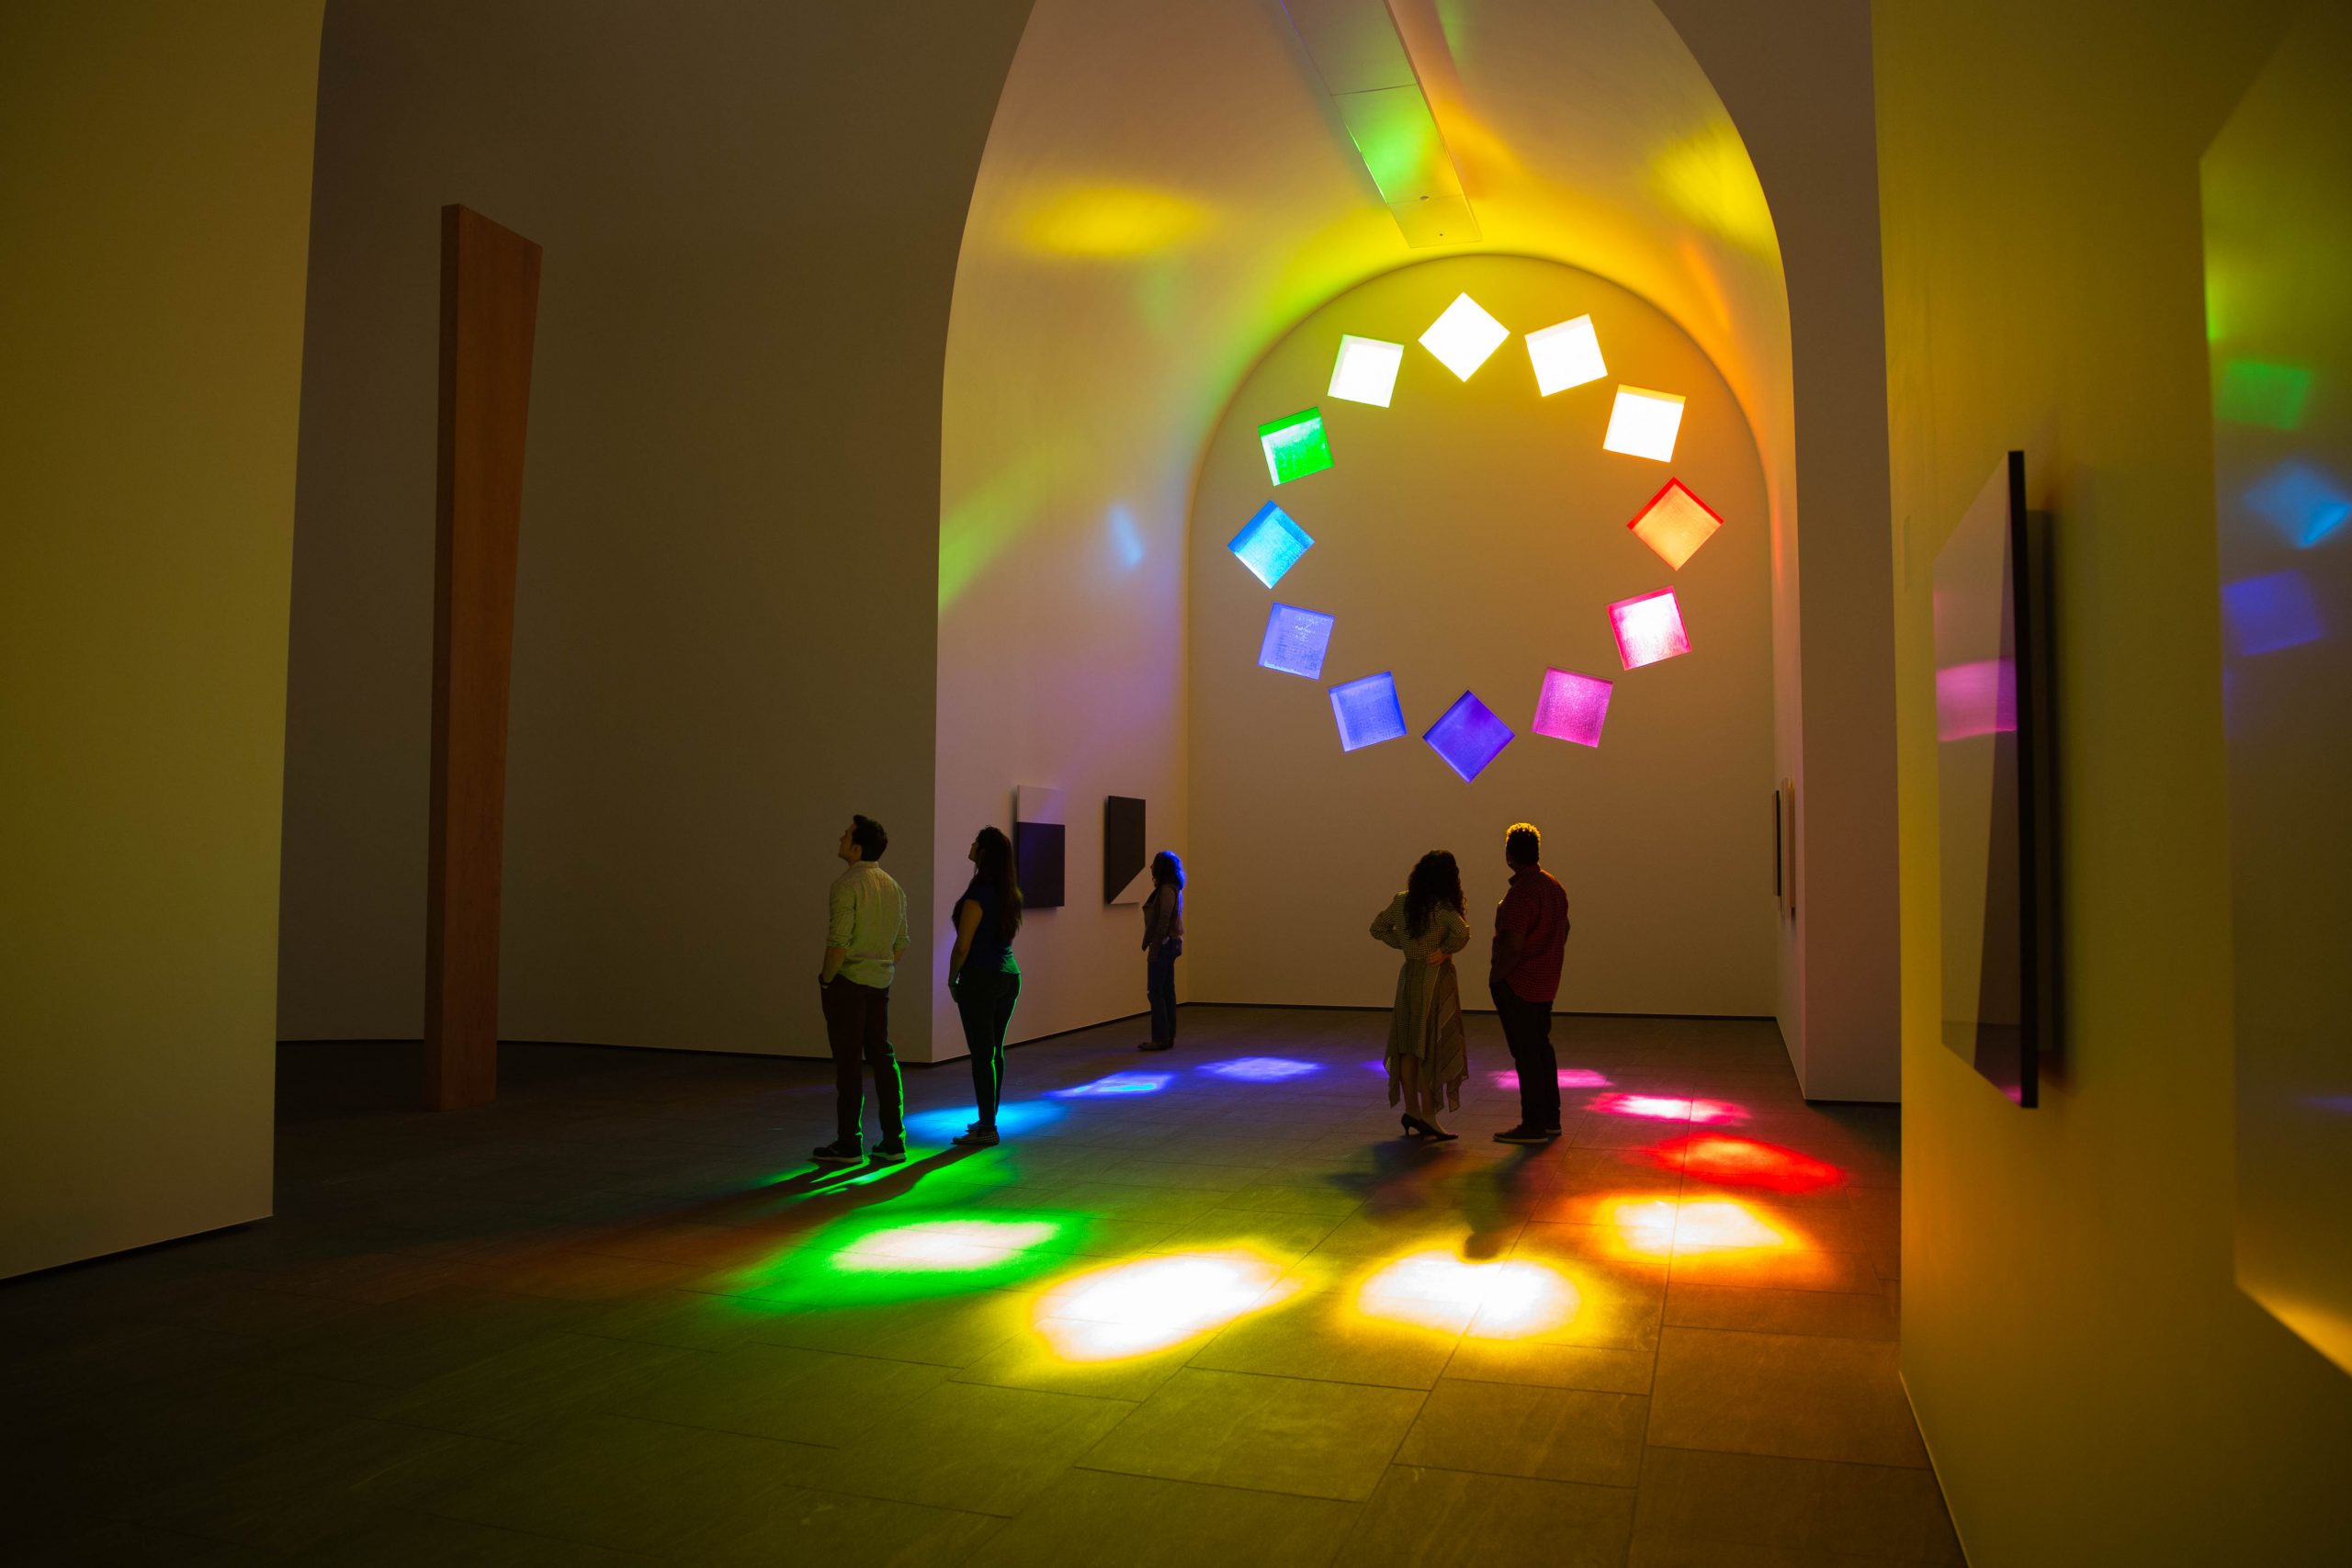 People standing inside a chapel-like building. A color wheel window of multi-colored glass squares tumbling in a circle project vivid colors on the floor of the building